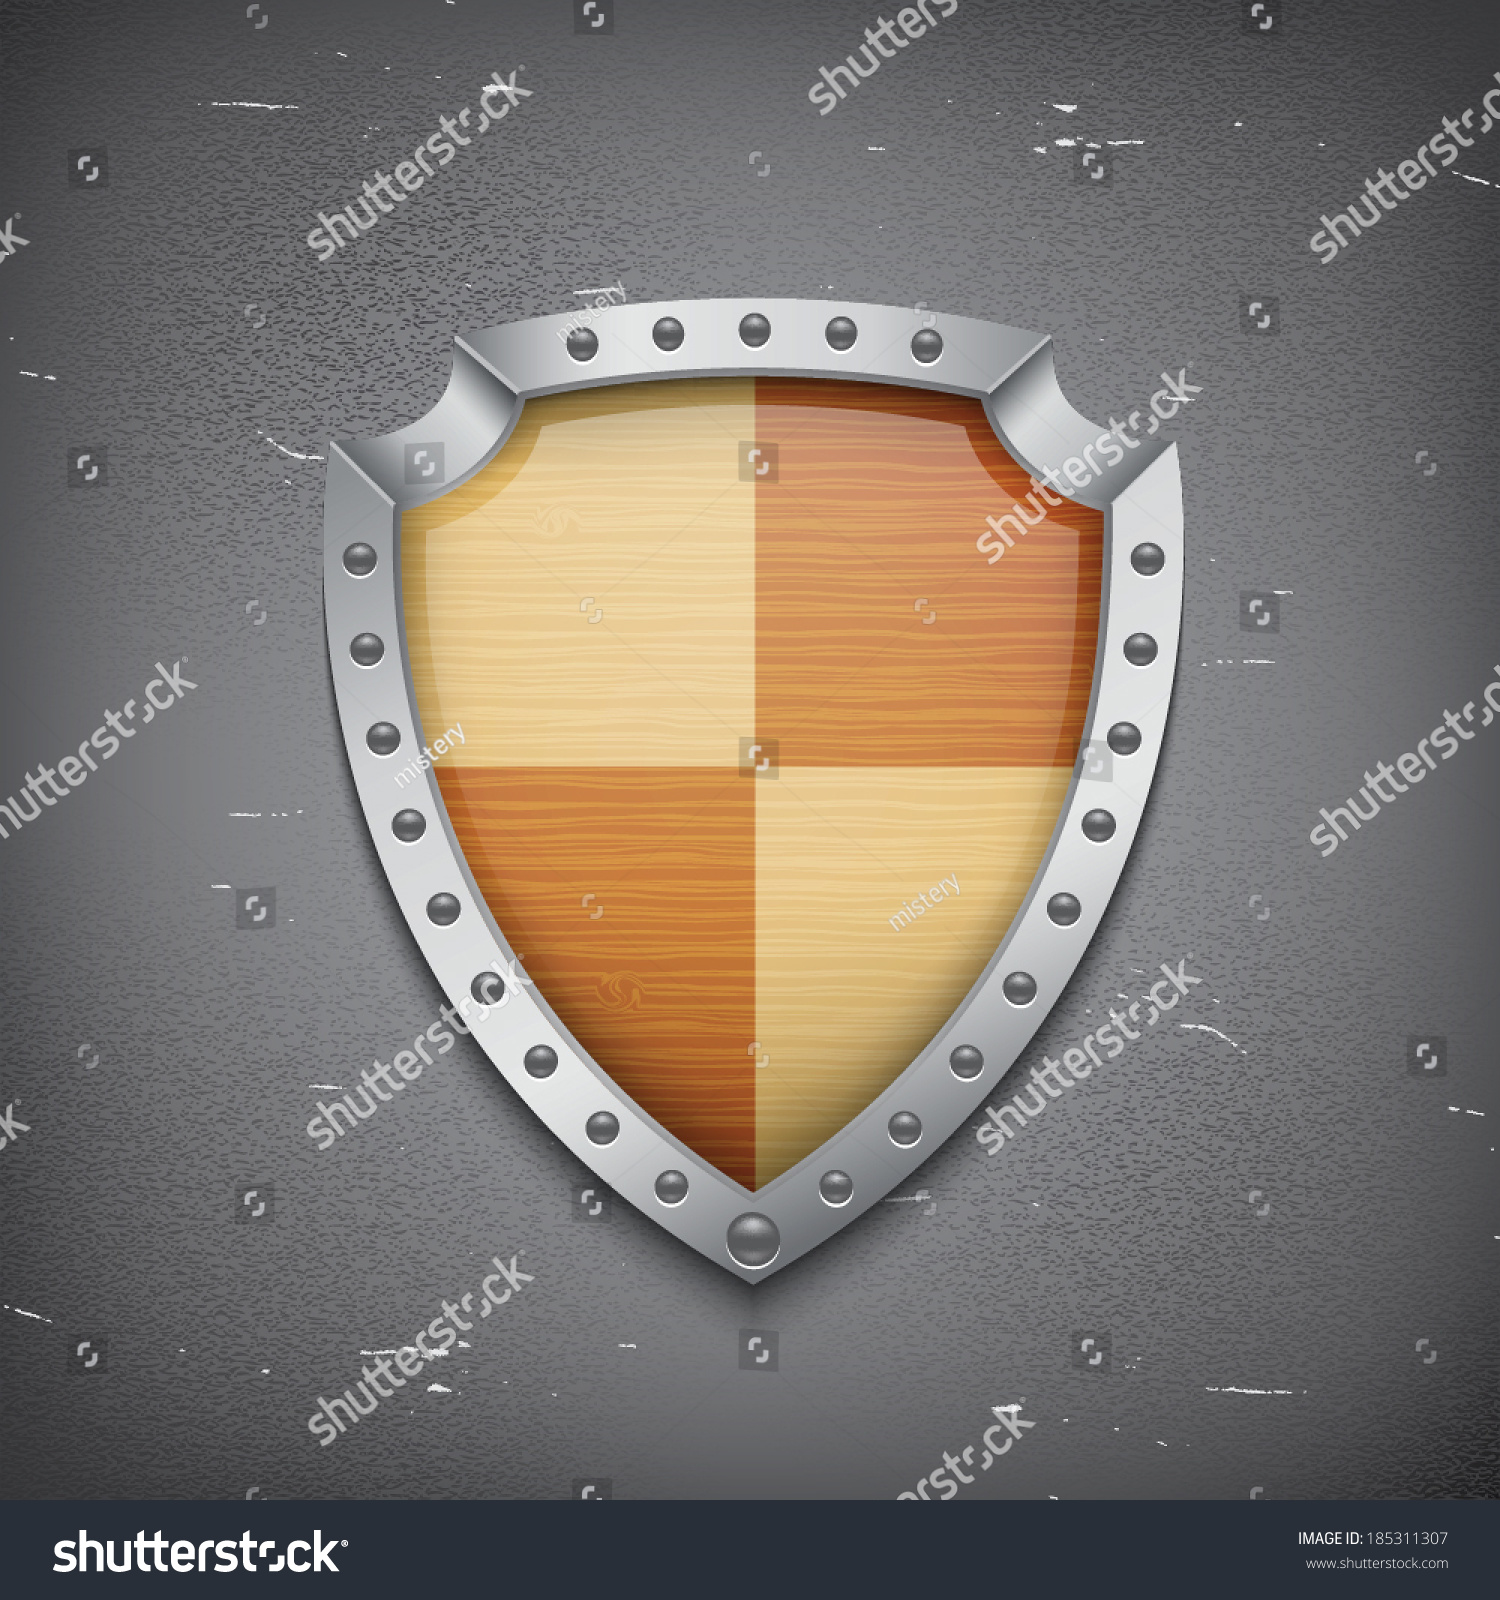 Shield With Wood Texture. Eps10 Vector - 185311307 : Shutterstock